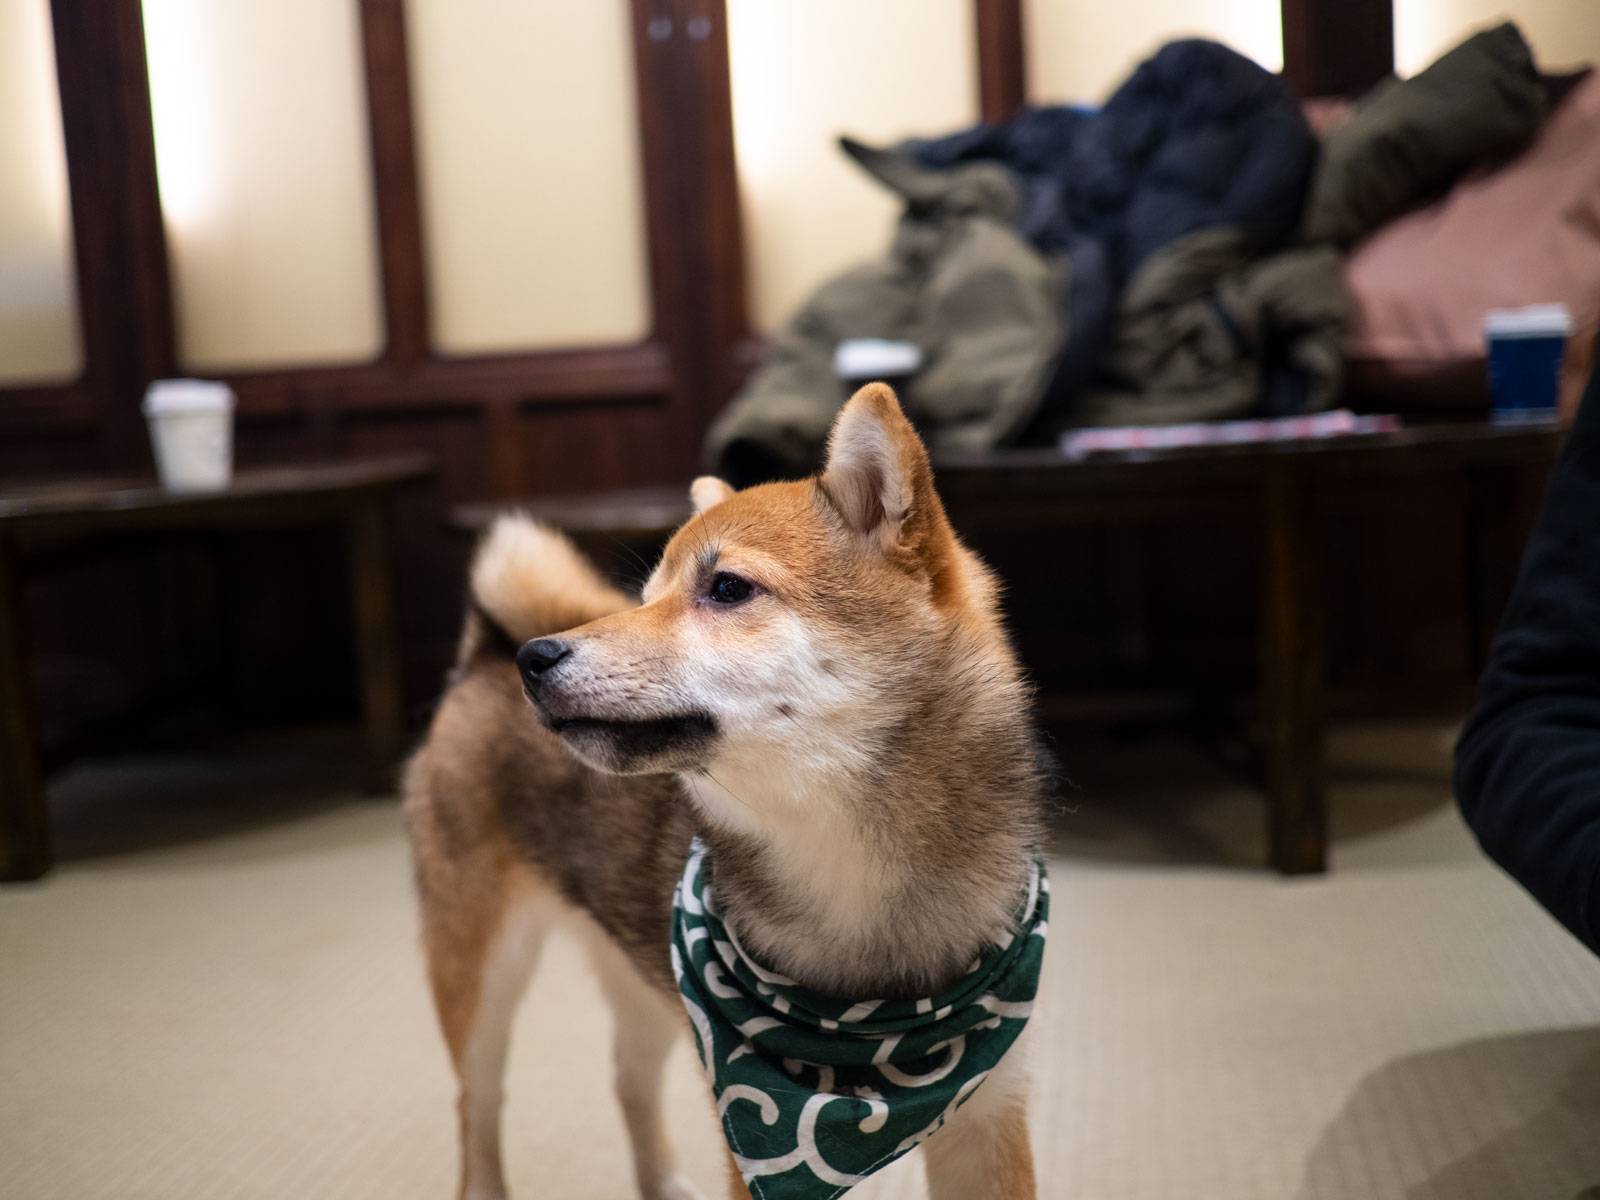 A shibe with a scarf